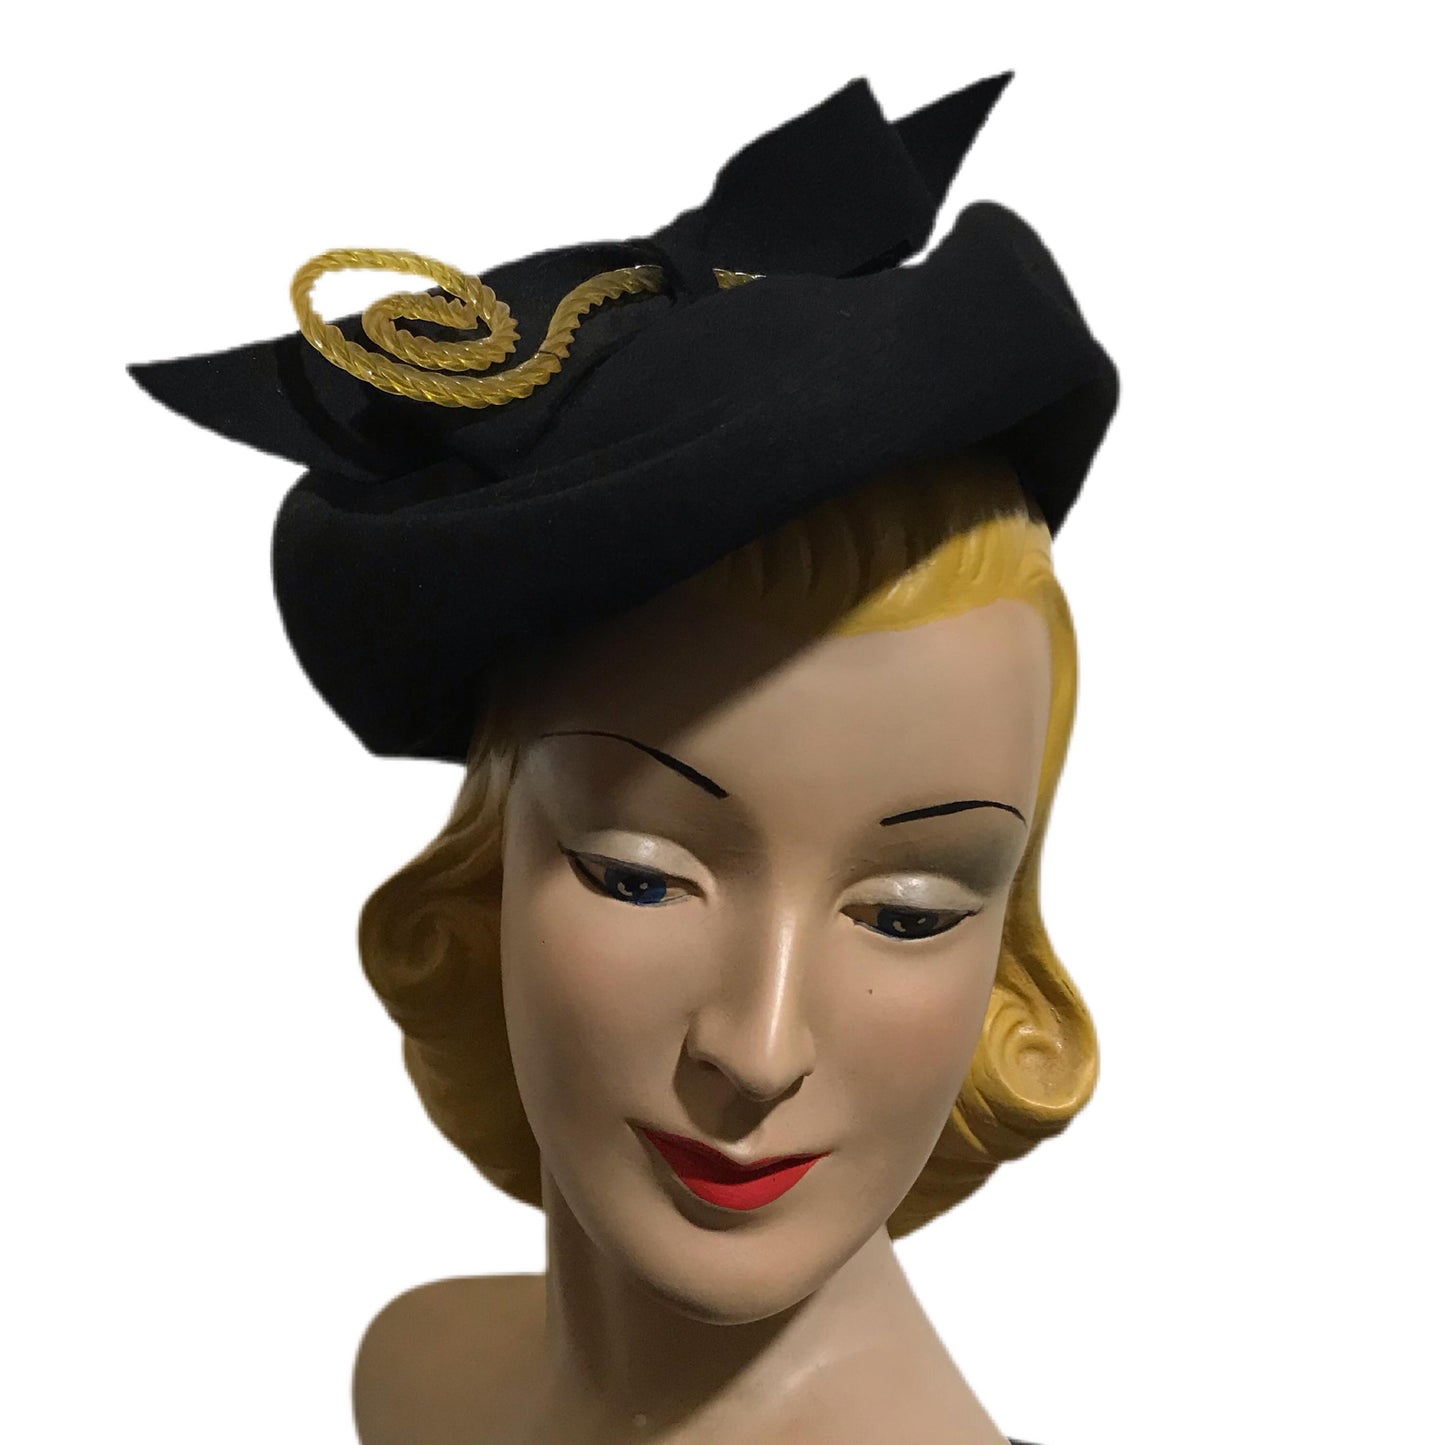 Black Folded Felted Wool Cocktail Hat with Spun Lucite Accent circa 1940s